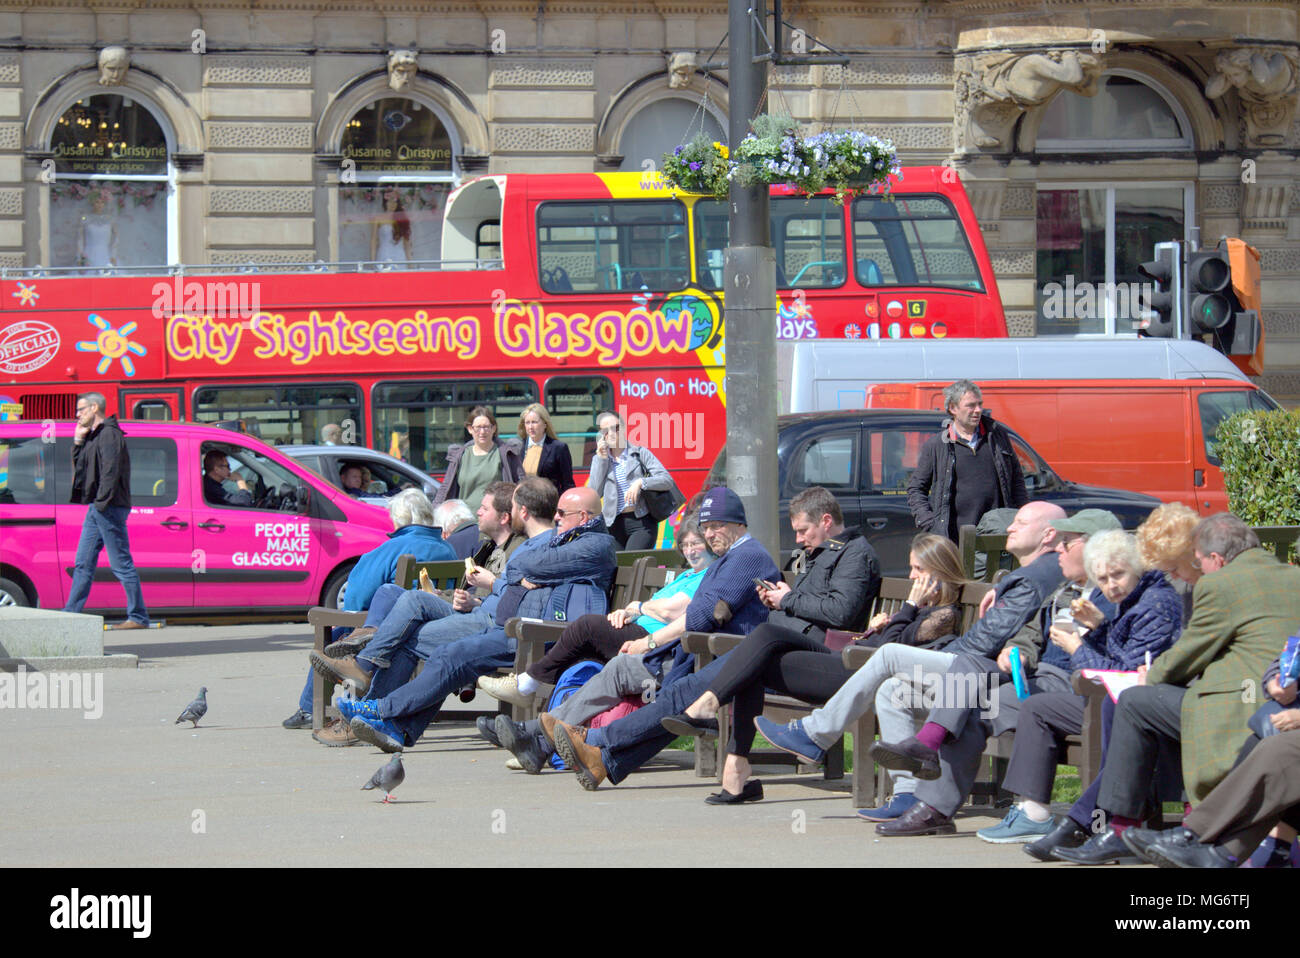 Glasgow, Scotland, UK 27th April. UK Weather: city sightseeing Glasgow bus with tourists Sunshine comes to the city as the locals and tourists enjoy the hot weather in George Square at the heart of the city. Gerard Ferry/Alamy news Stock Photo